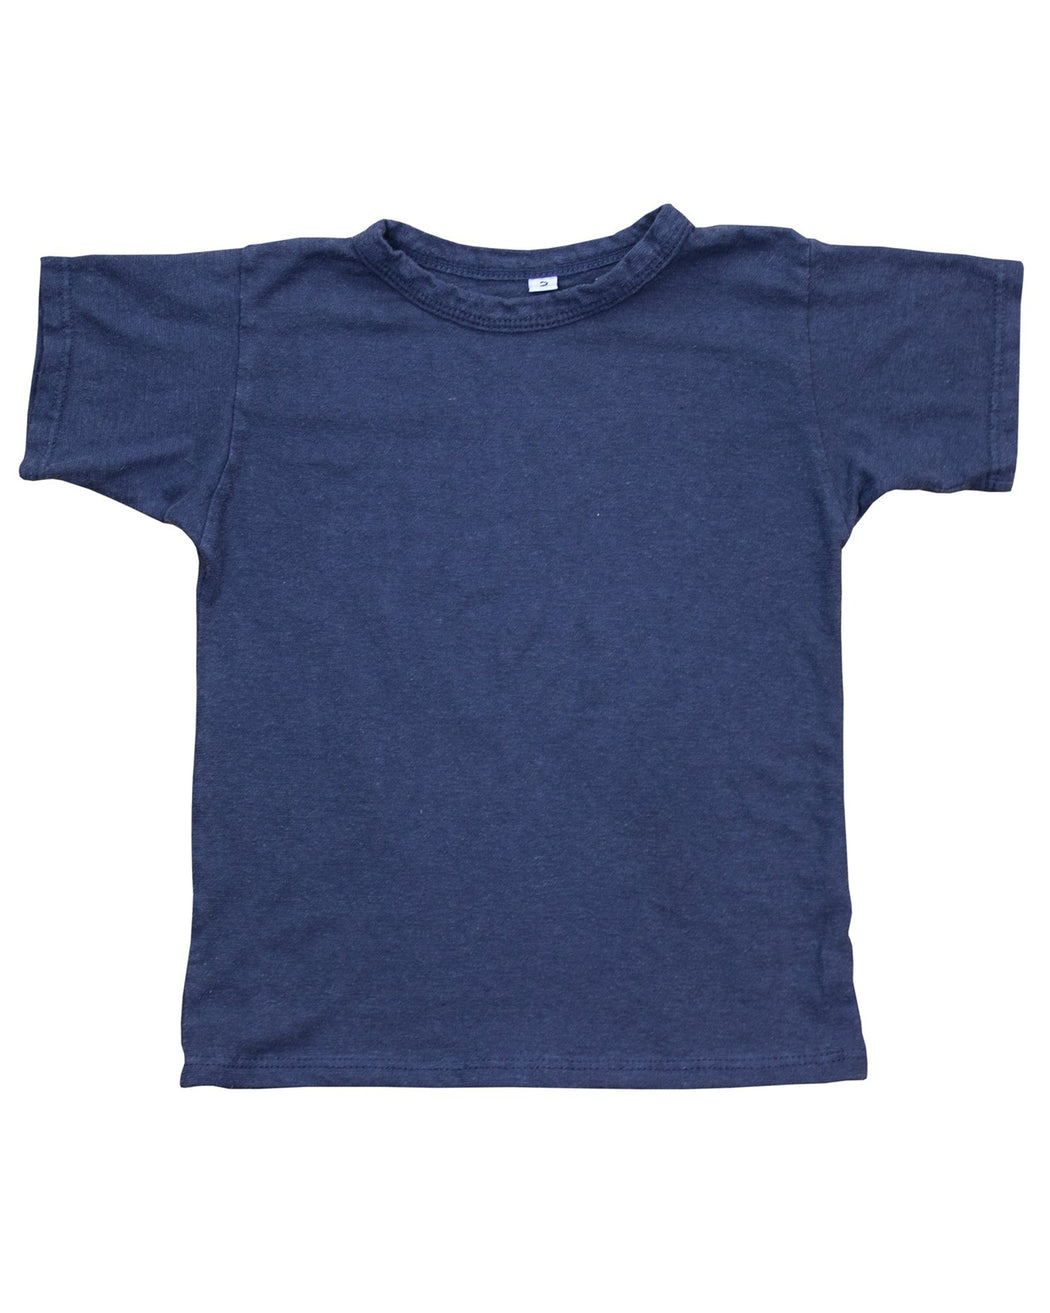 Grom Kid's Tee – Assorted Colors